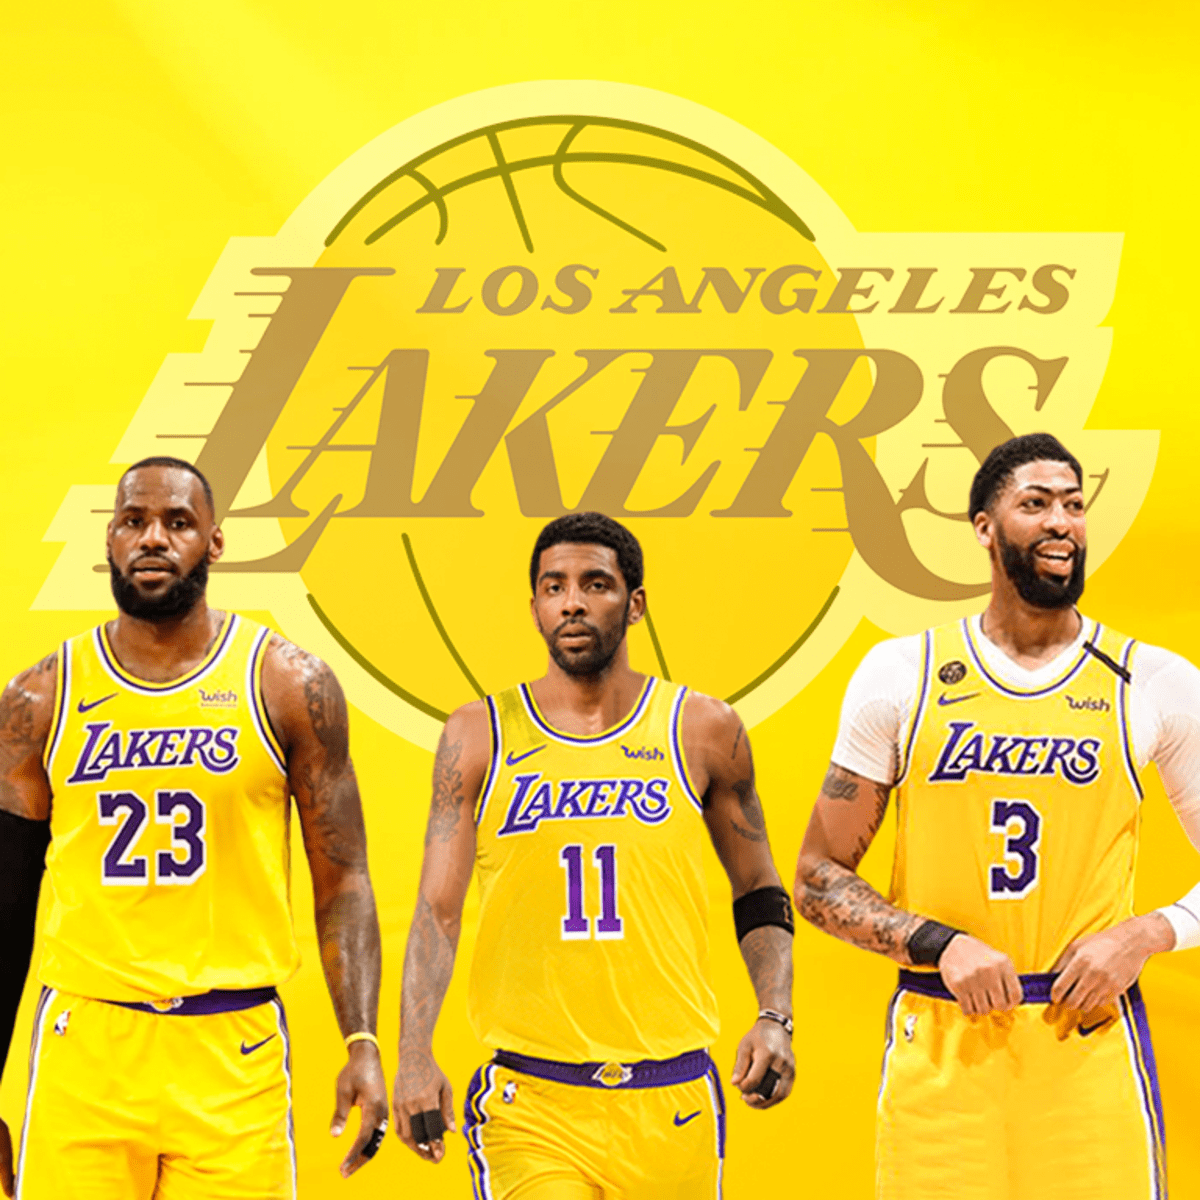 Kyrie to the Lakers? - Design Breakdown in Photoshop 